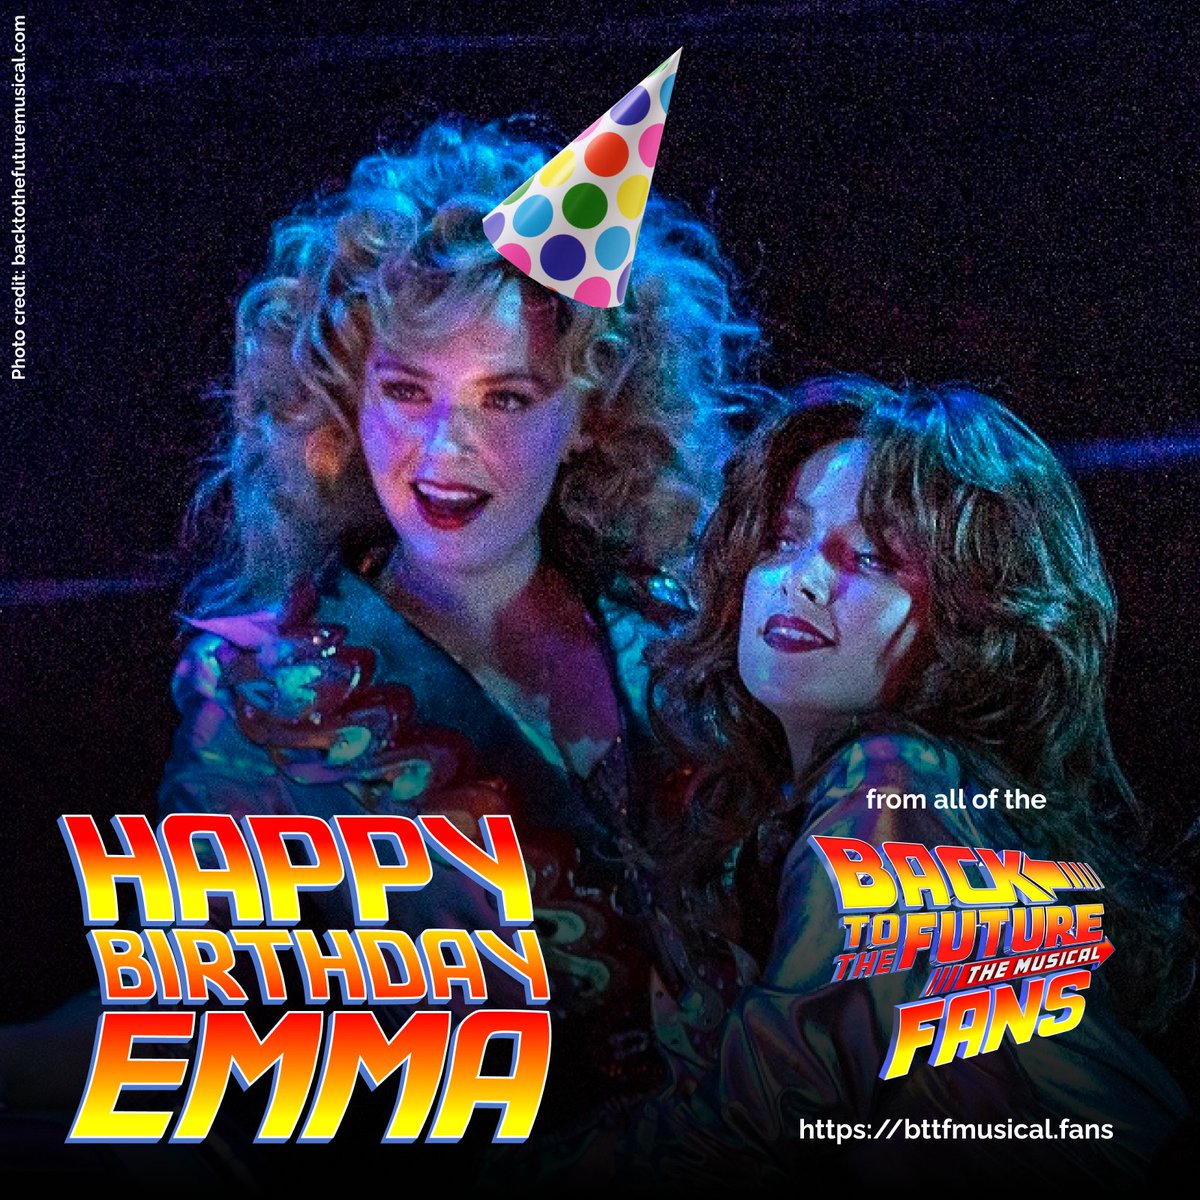 HAPPY BIRTHDAY to @emmawlloyd who plays multiple residents of Hill Valley in @BTTFmusical including #LindaMcFly and #StellaBaines 🥳

We hope you have an amazing day! 🎉

#bttfmusical #backtothefuturemusical #backtothefuturethemusical #bttf #backtothefuture #hillvalley